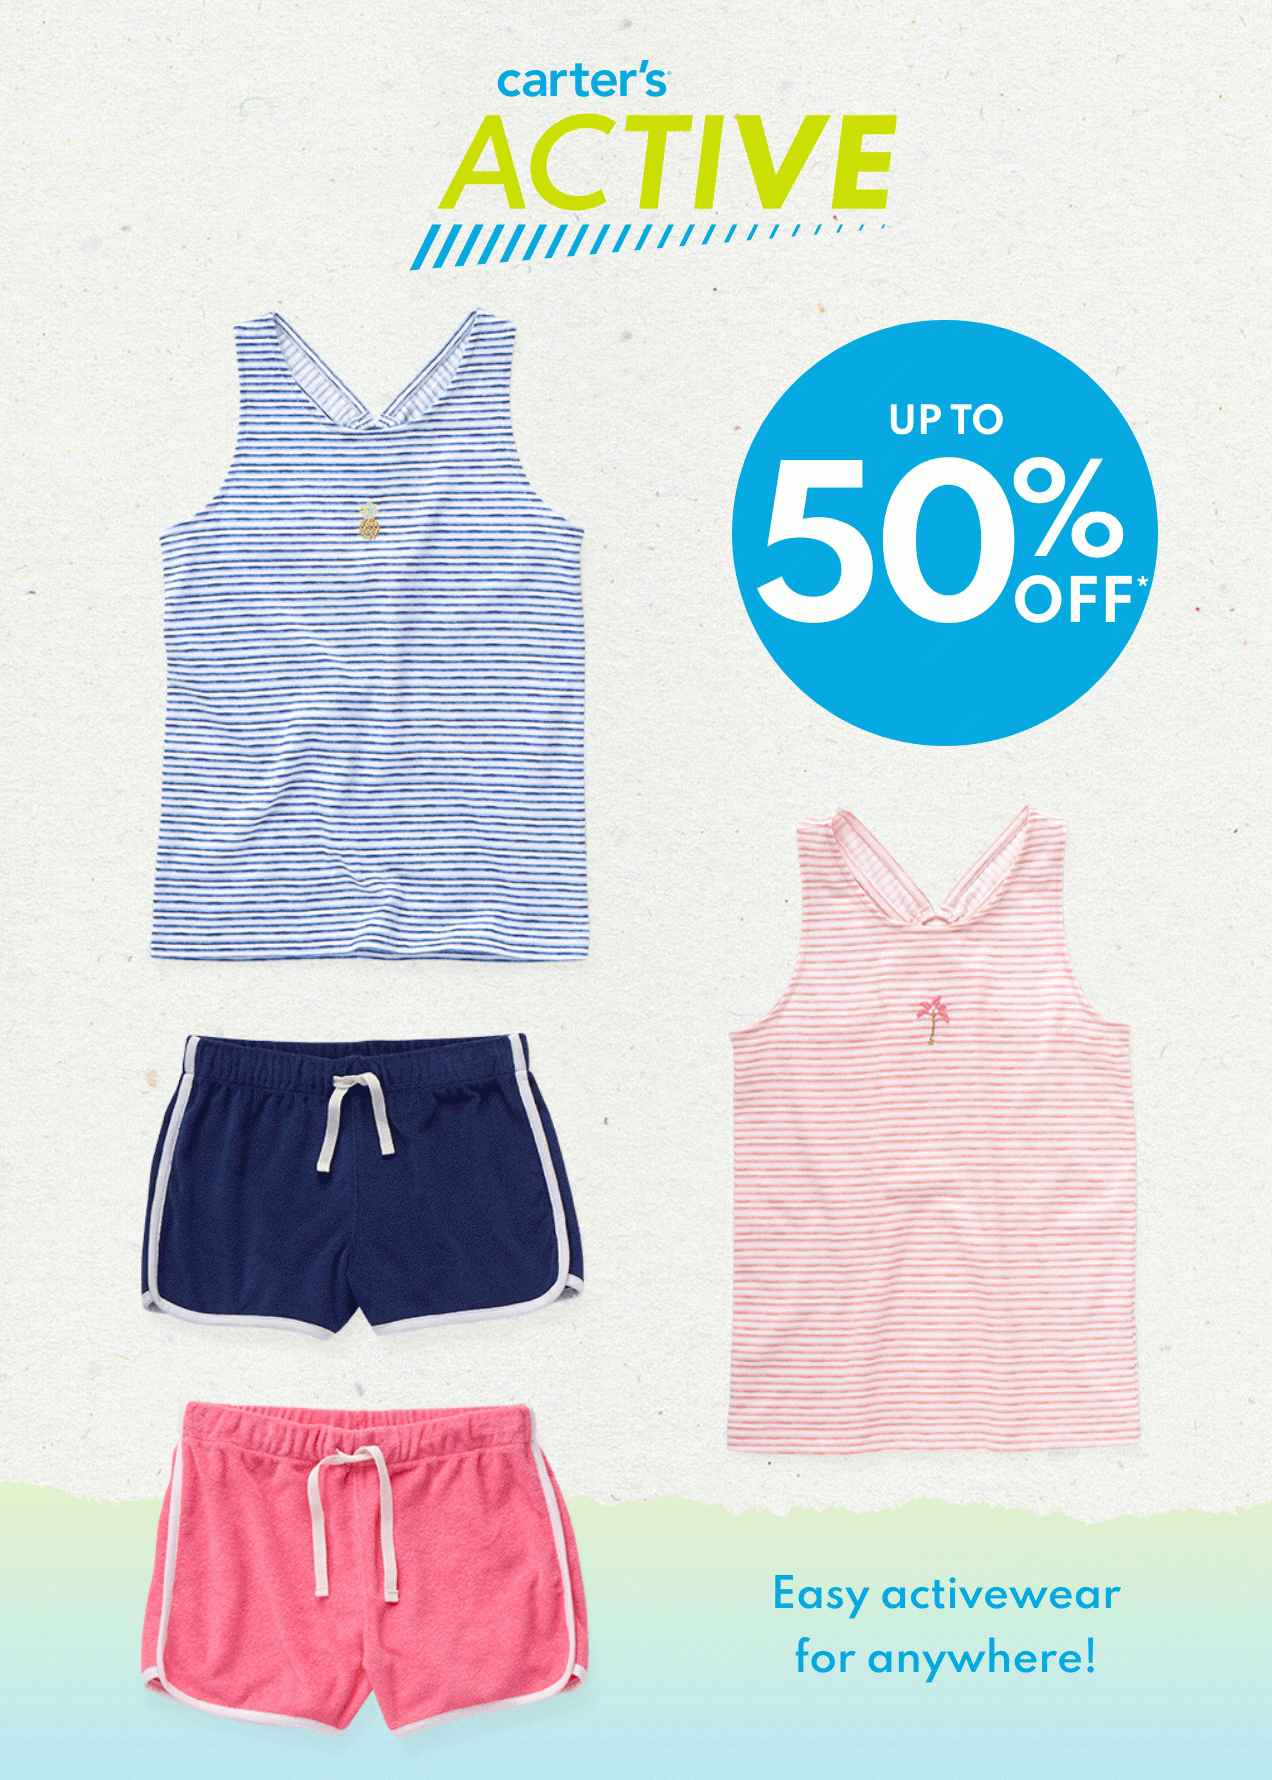 carter's ACTIVE | UP TO 50% OFF* | Easy activewear for anywhere! 